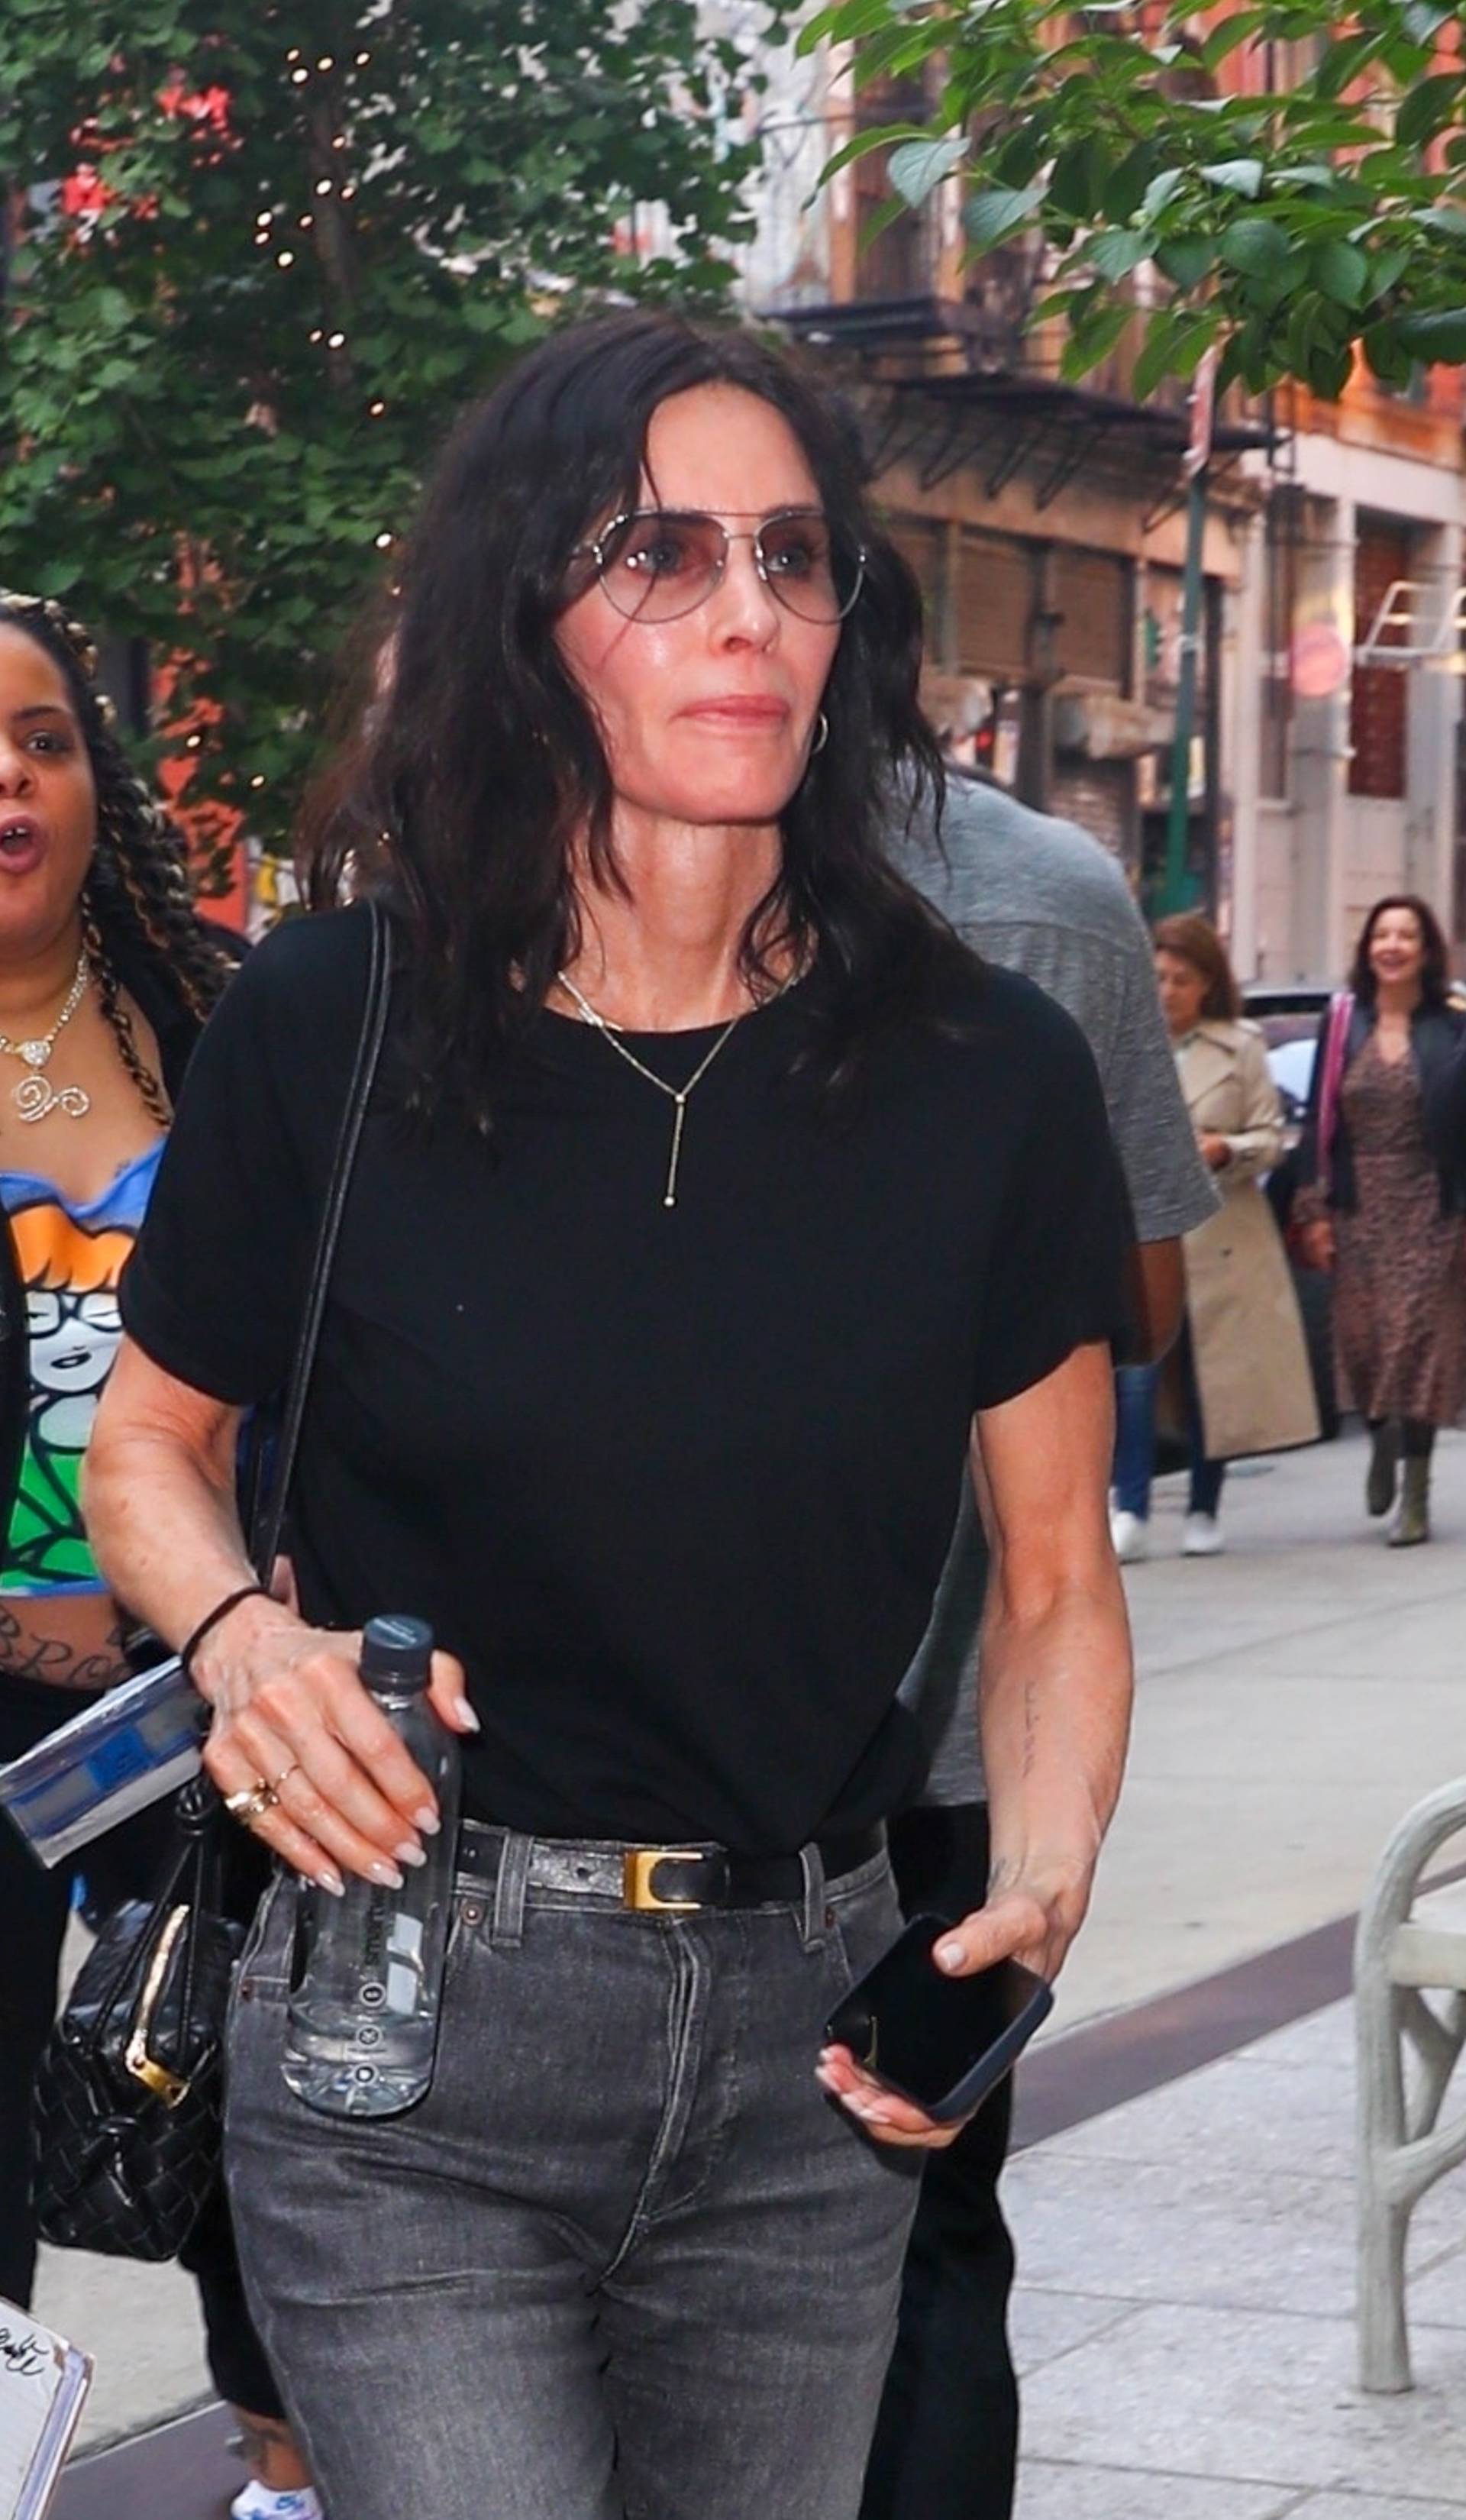 Courtney Cox greets fans while returning to her hotel this afternoon in SOHO